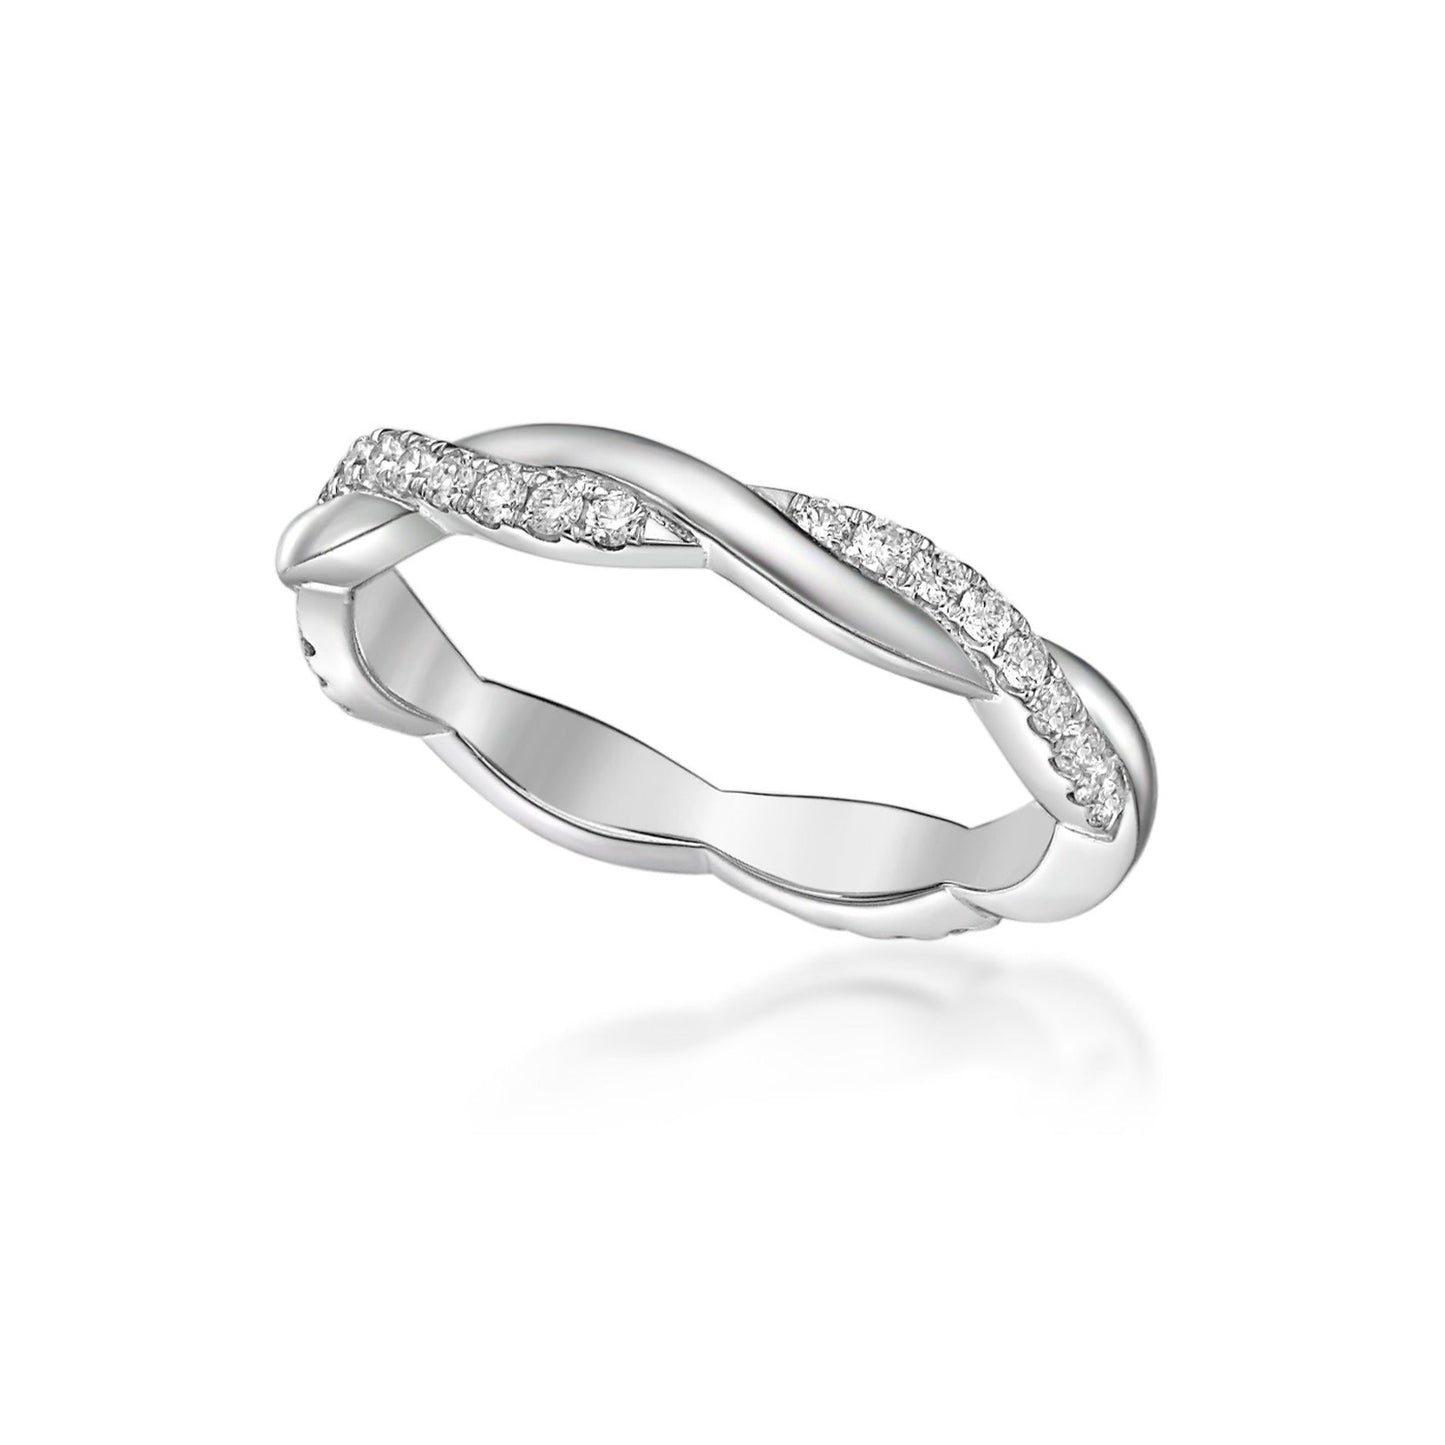 Handmade 18K White Gold Twisted Eternity Band with polished and diamond threads